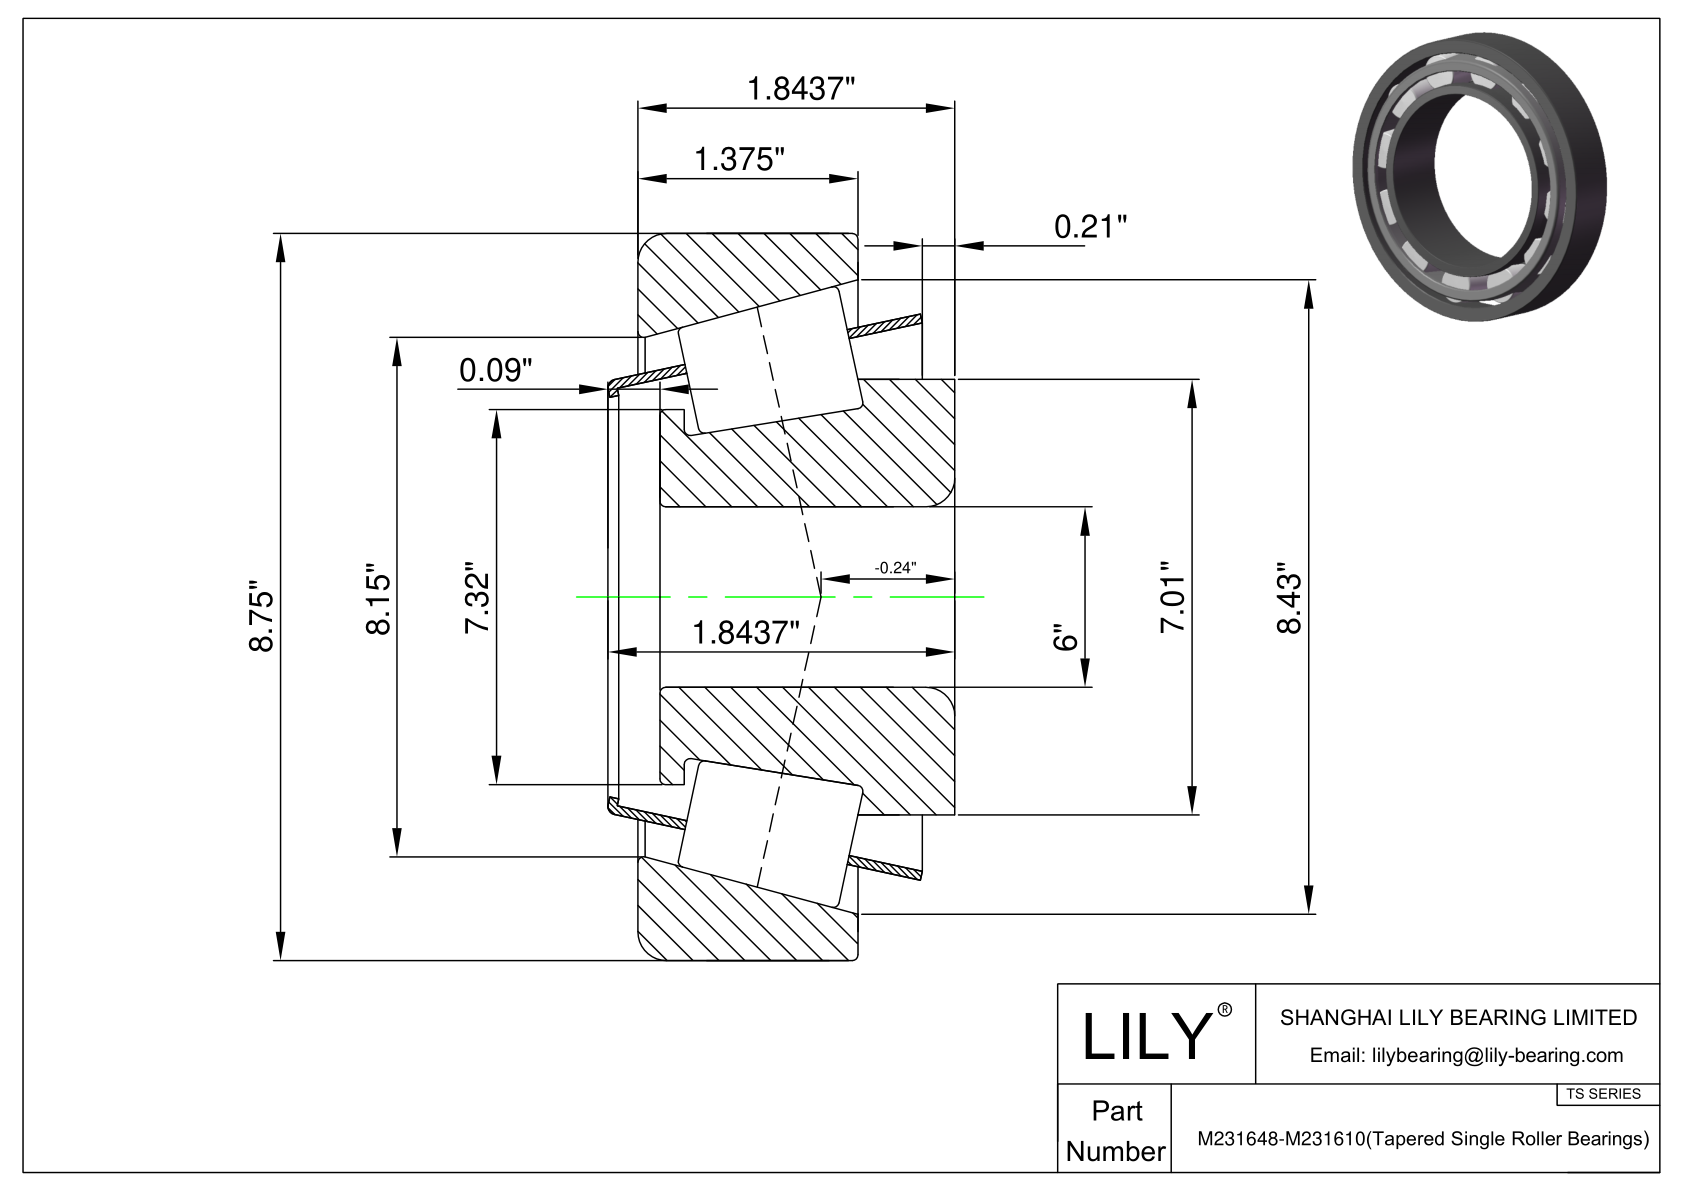 M231648-M231610 TS (Tapered Single Roller Bearings) (Imperial) cad drawing